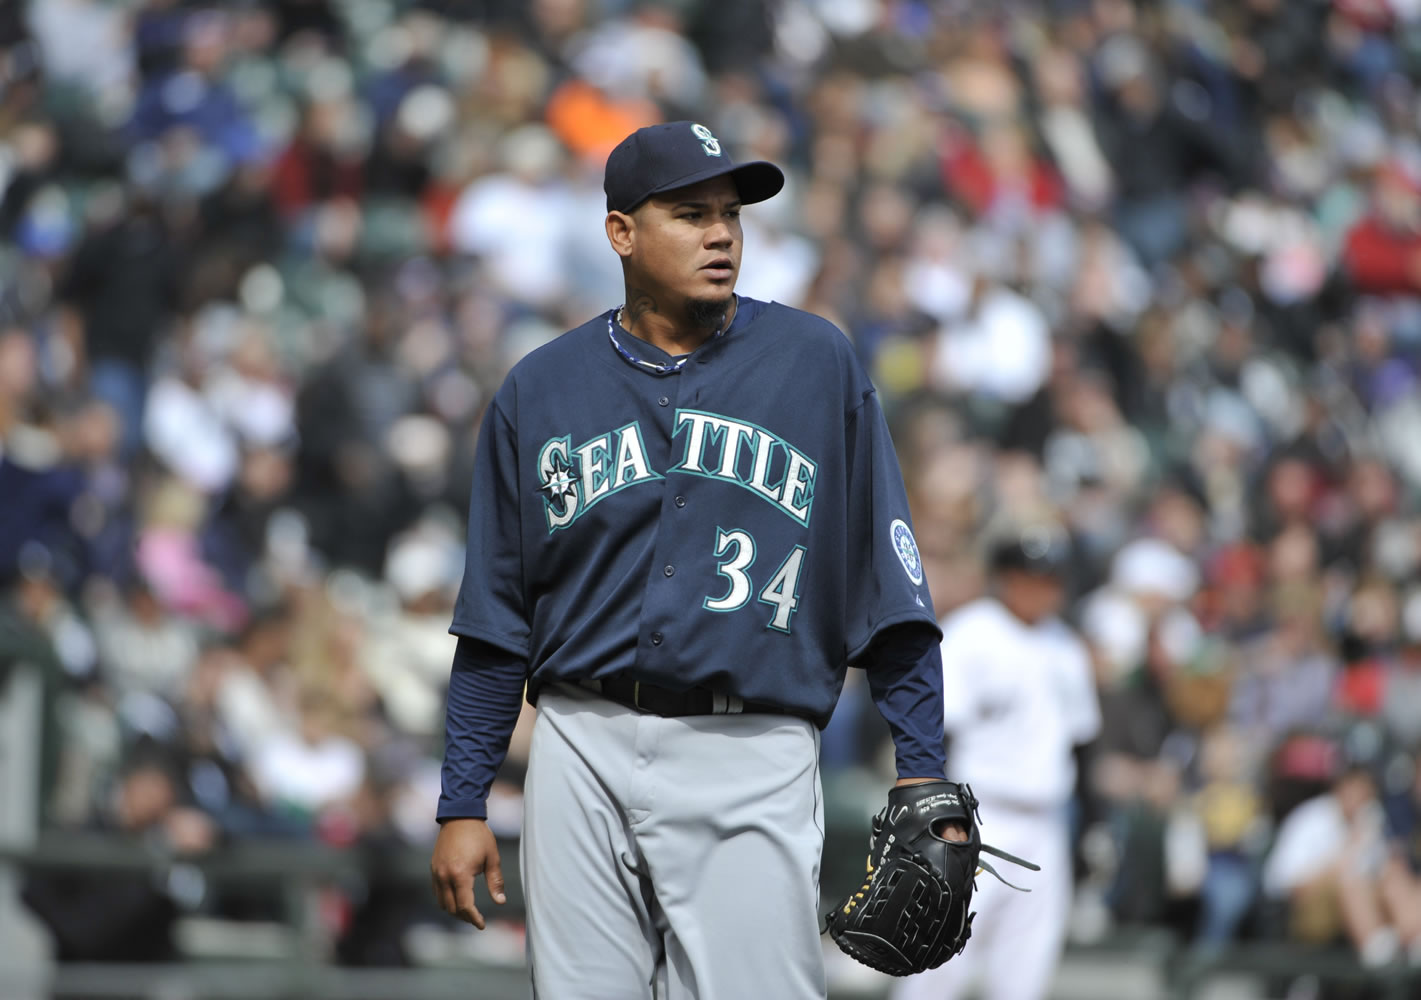 Seattle Mariners starting pitcher Felix Hernandez leaves the game after pitching 6 1/3 innings against the Chicago White Sox on Saturday.